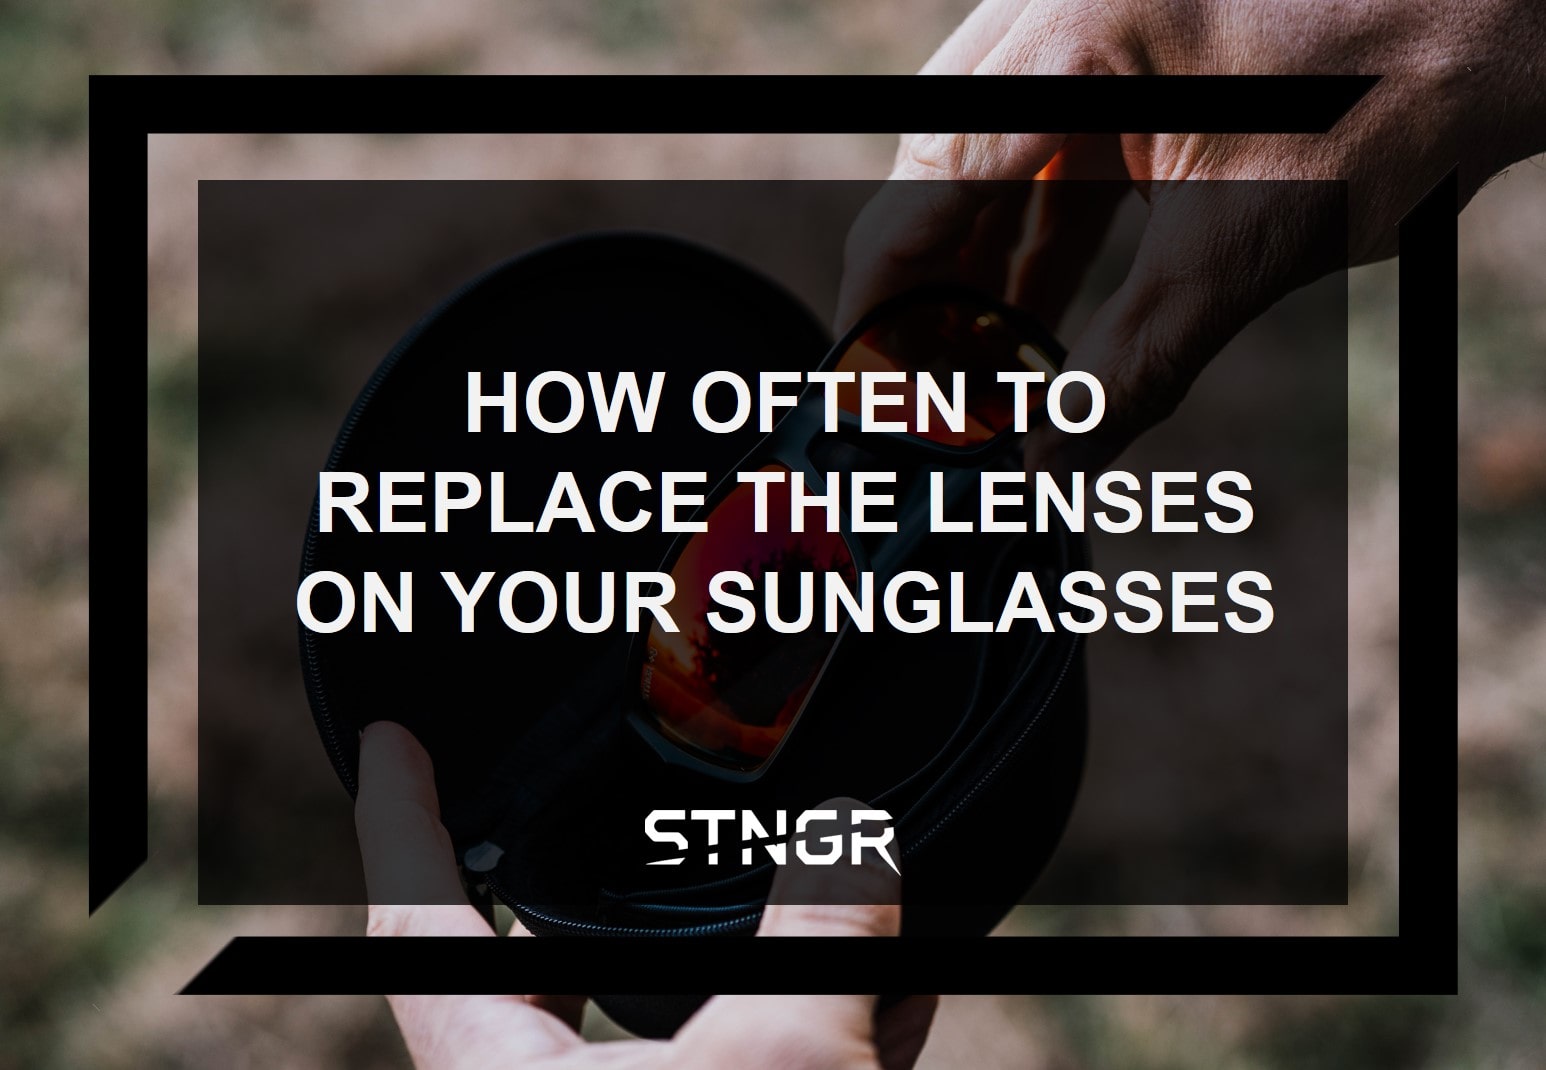 How Often to Replace the Lenses on Your Sunglasses